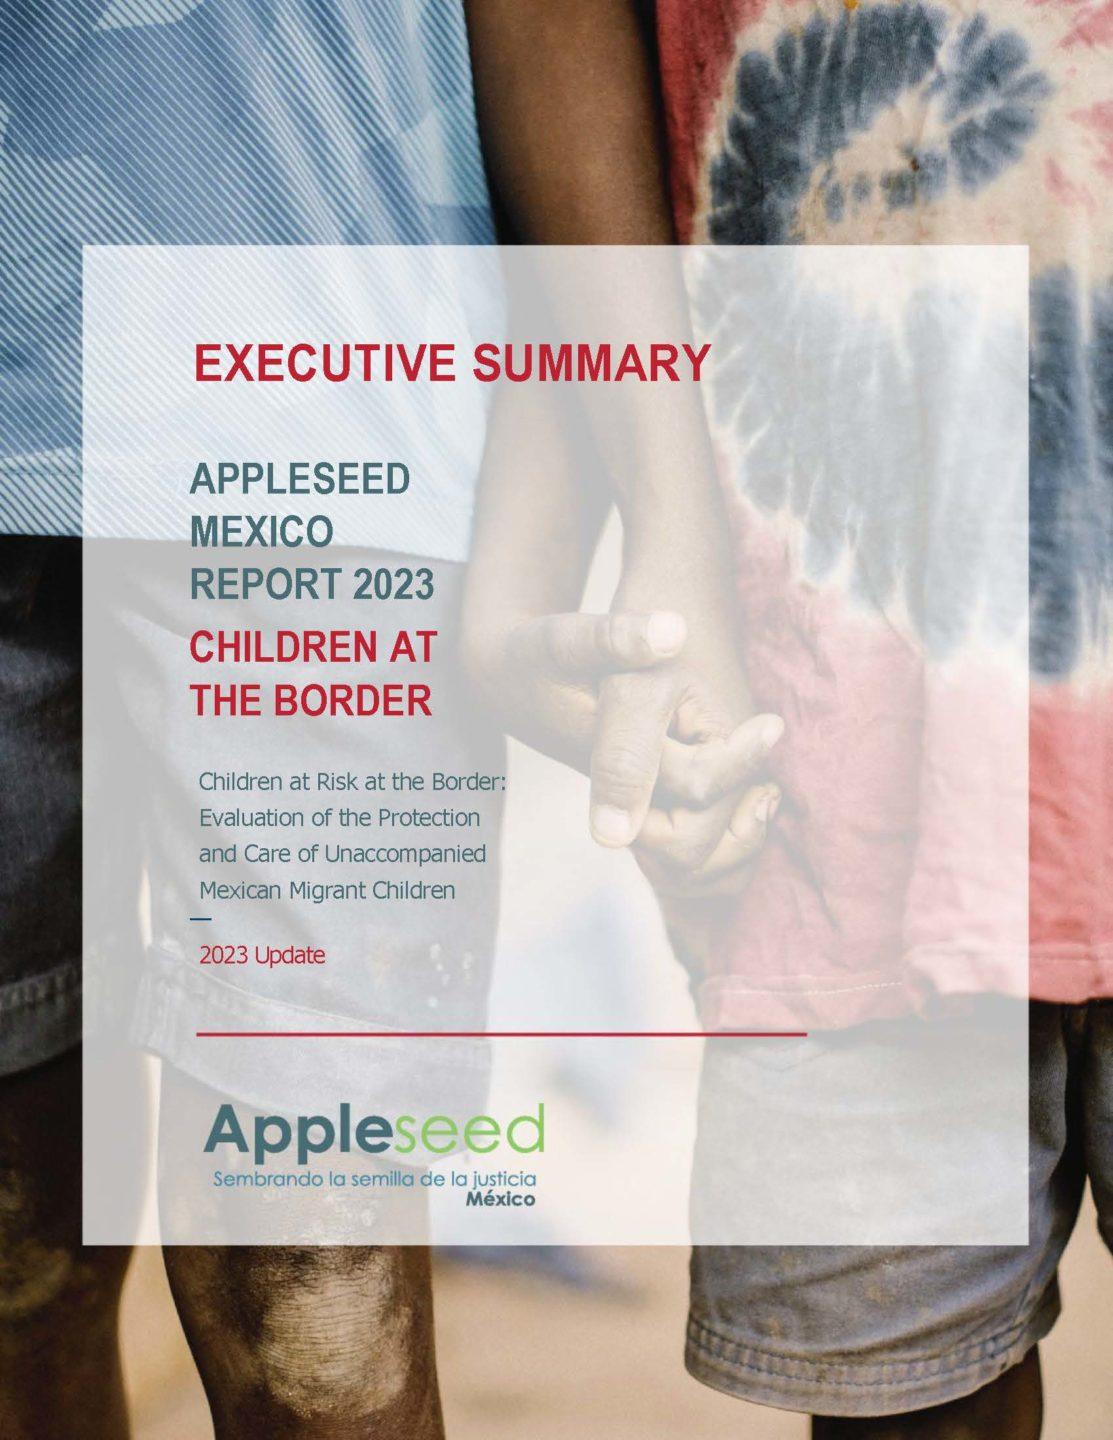 Executive Summary 2023 | Children at Risk at the Border: Evaluation of the Protection and Care of Unaccompanied Mexican Migrant Children